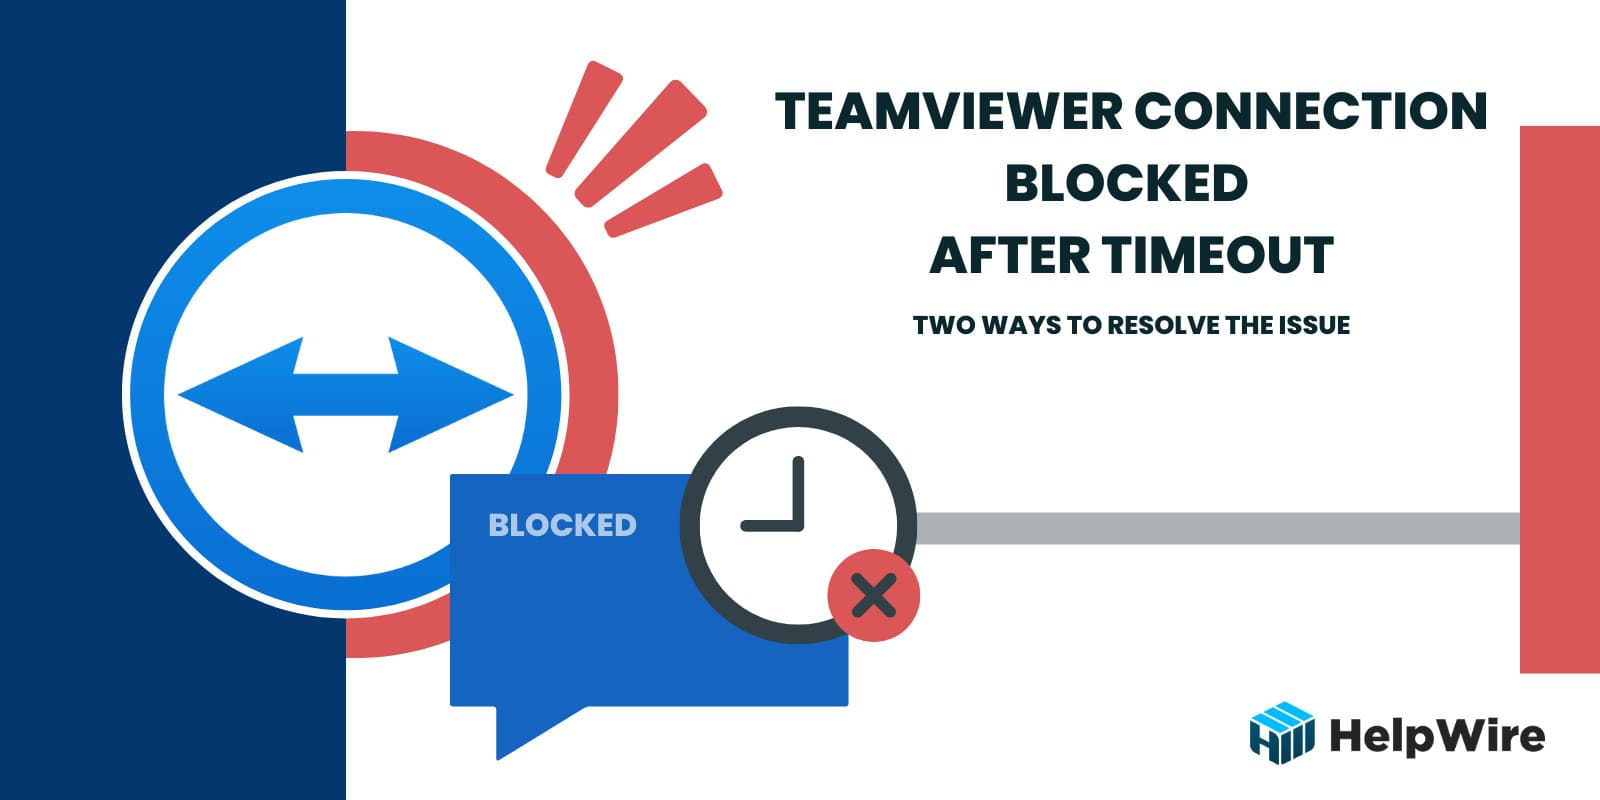 A TeamViewer Connection is Blocked After a Timeout